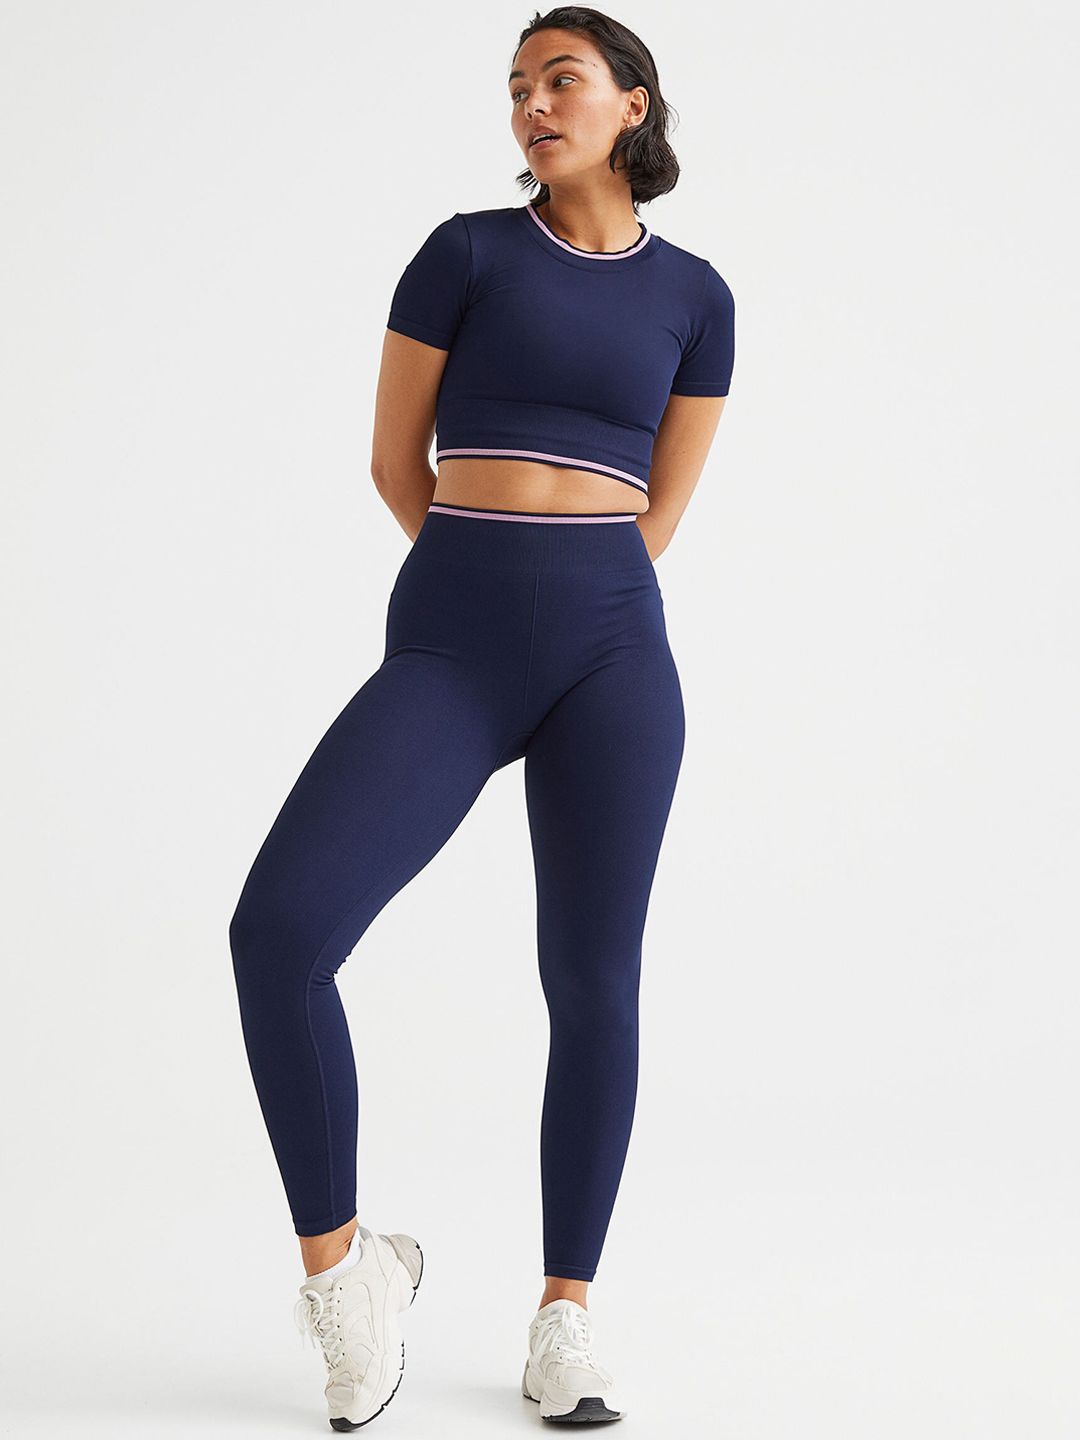 H&M Women Navy Blue Seamless Sports Tights Price in India